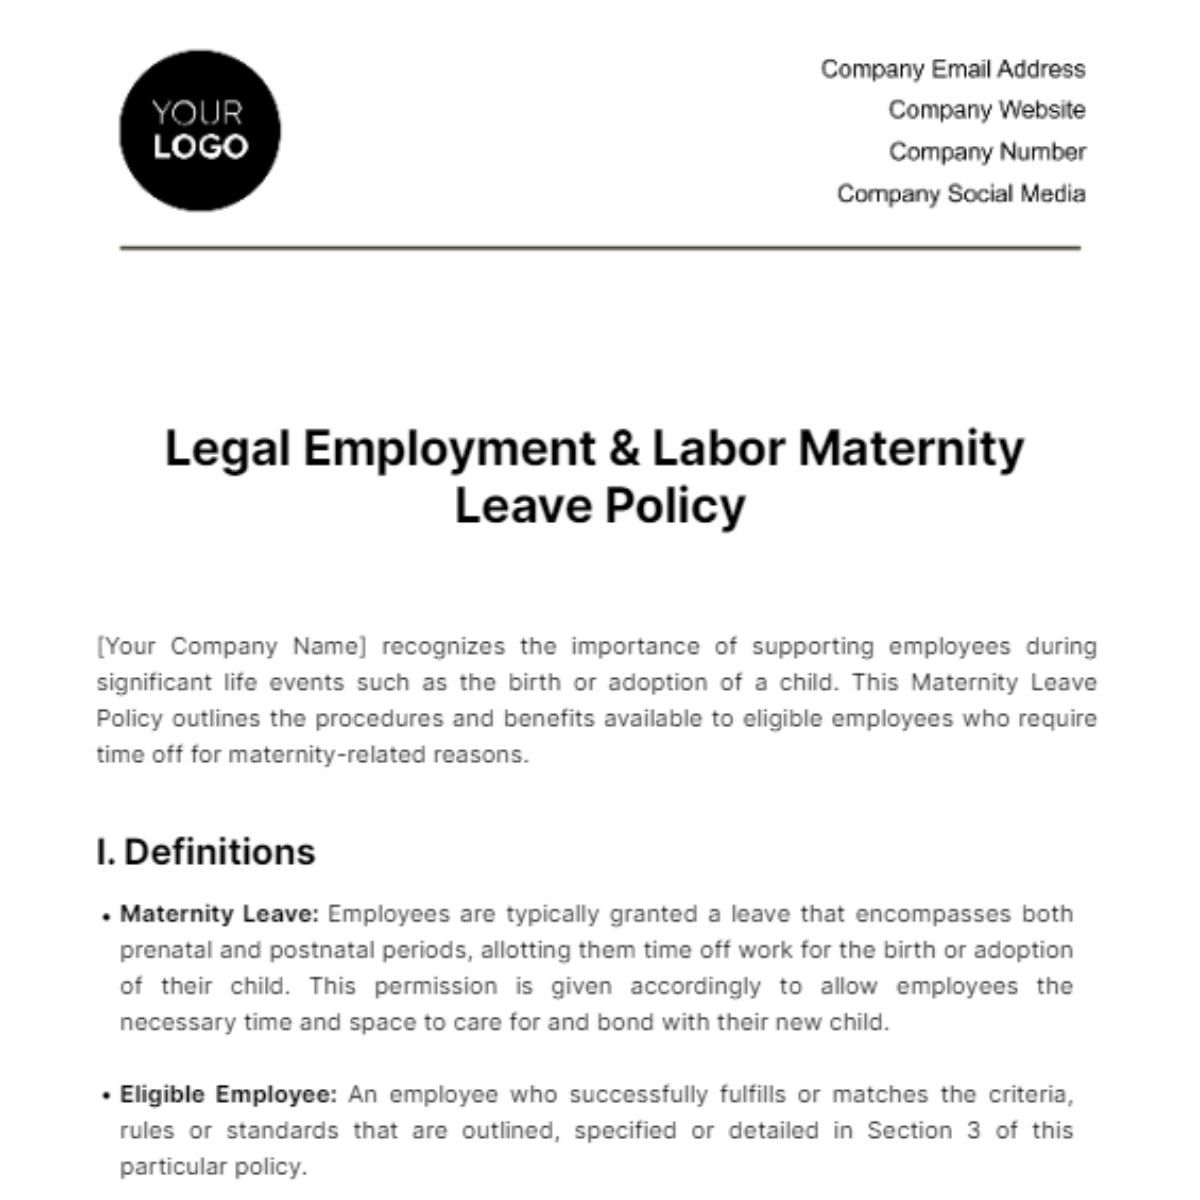 Free Legal Employment & Labor Maternity Leave Policy Template